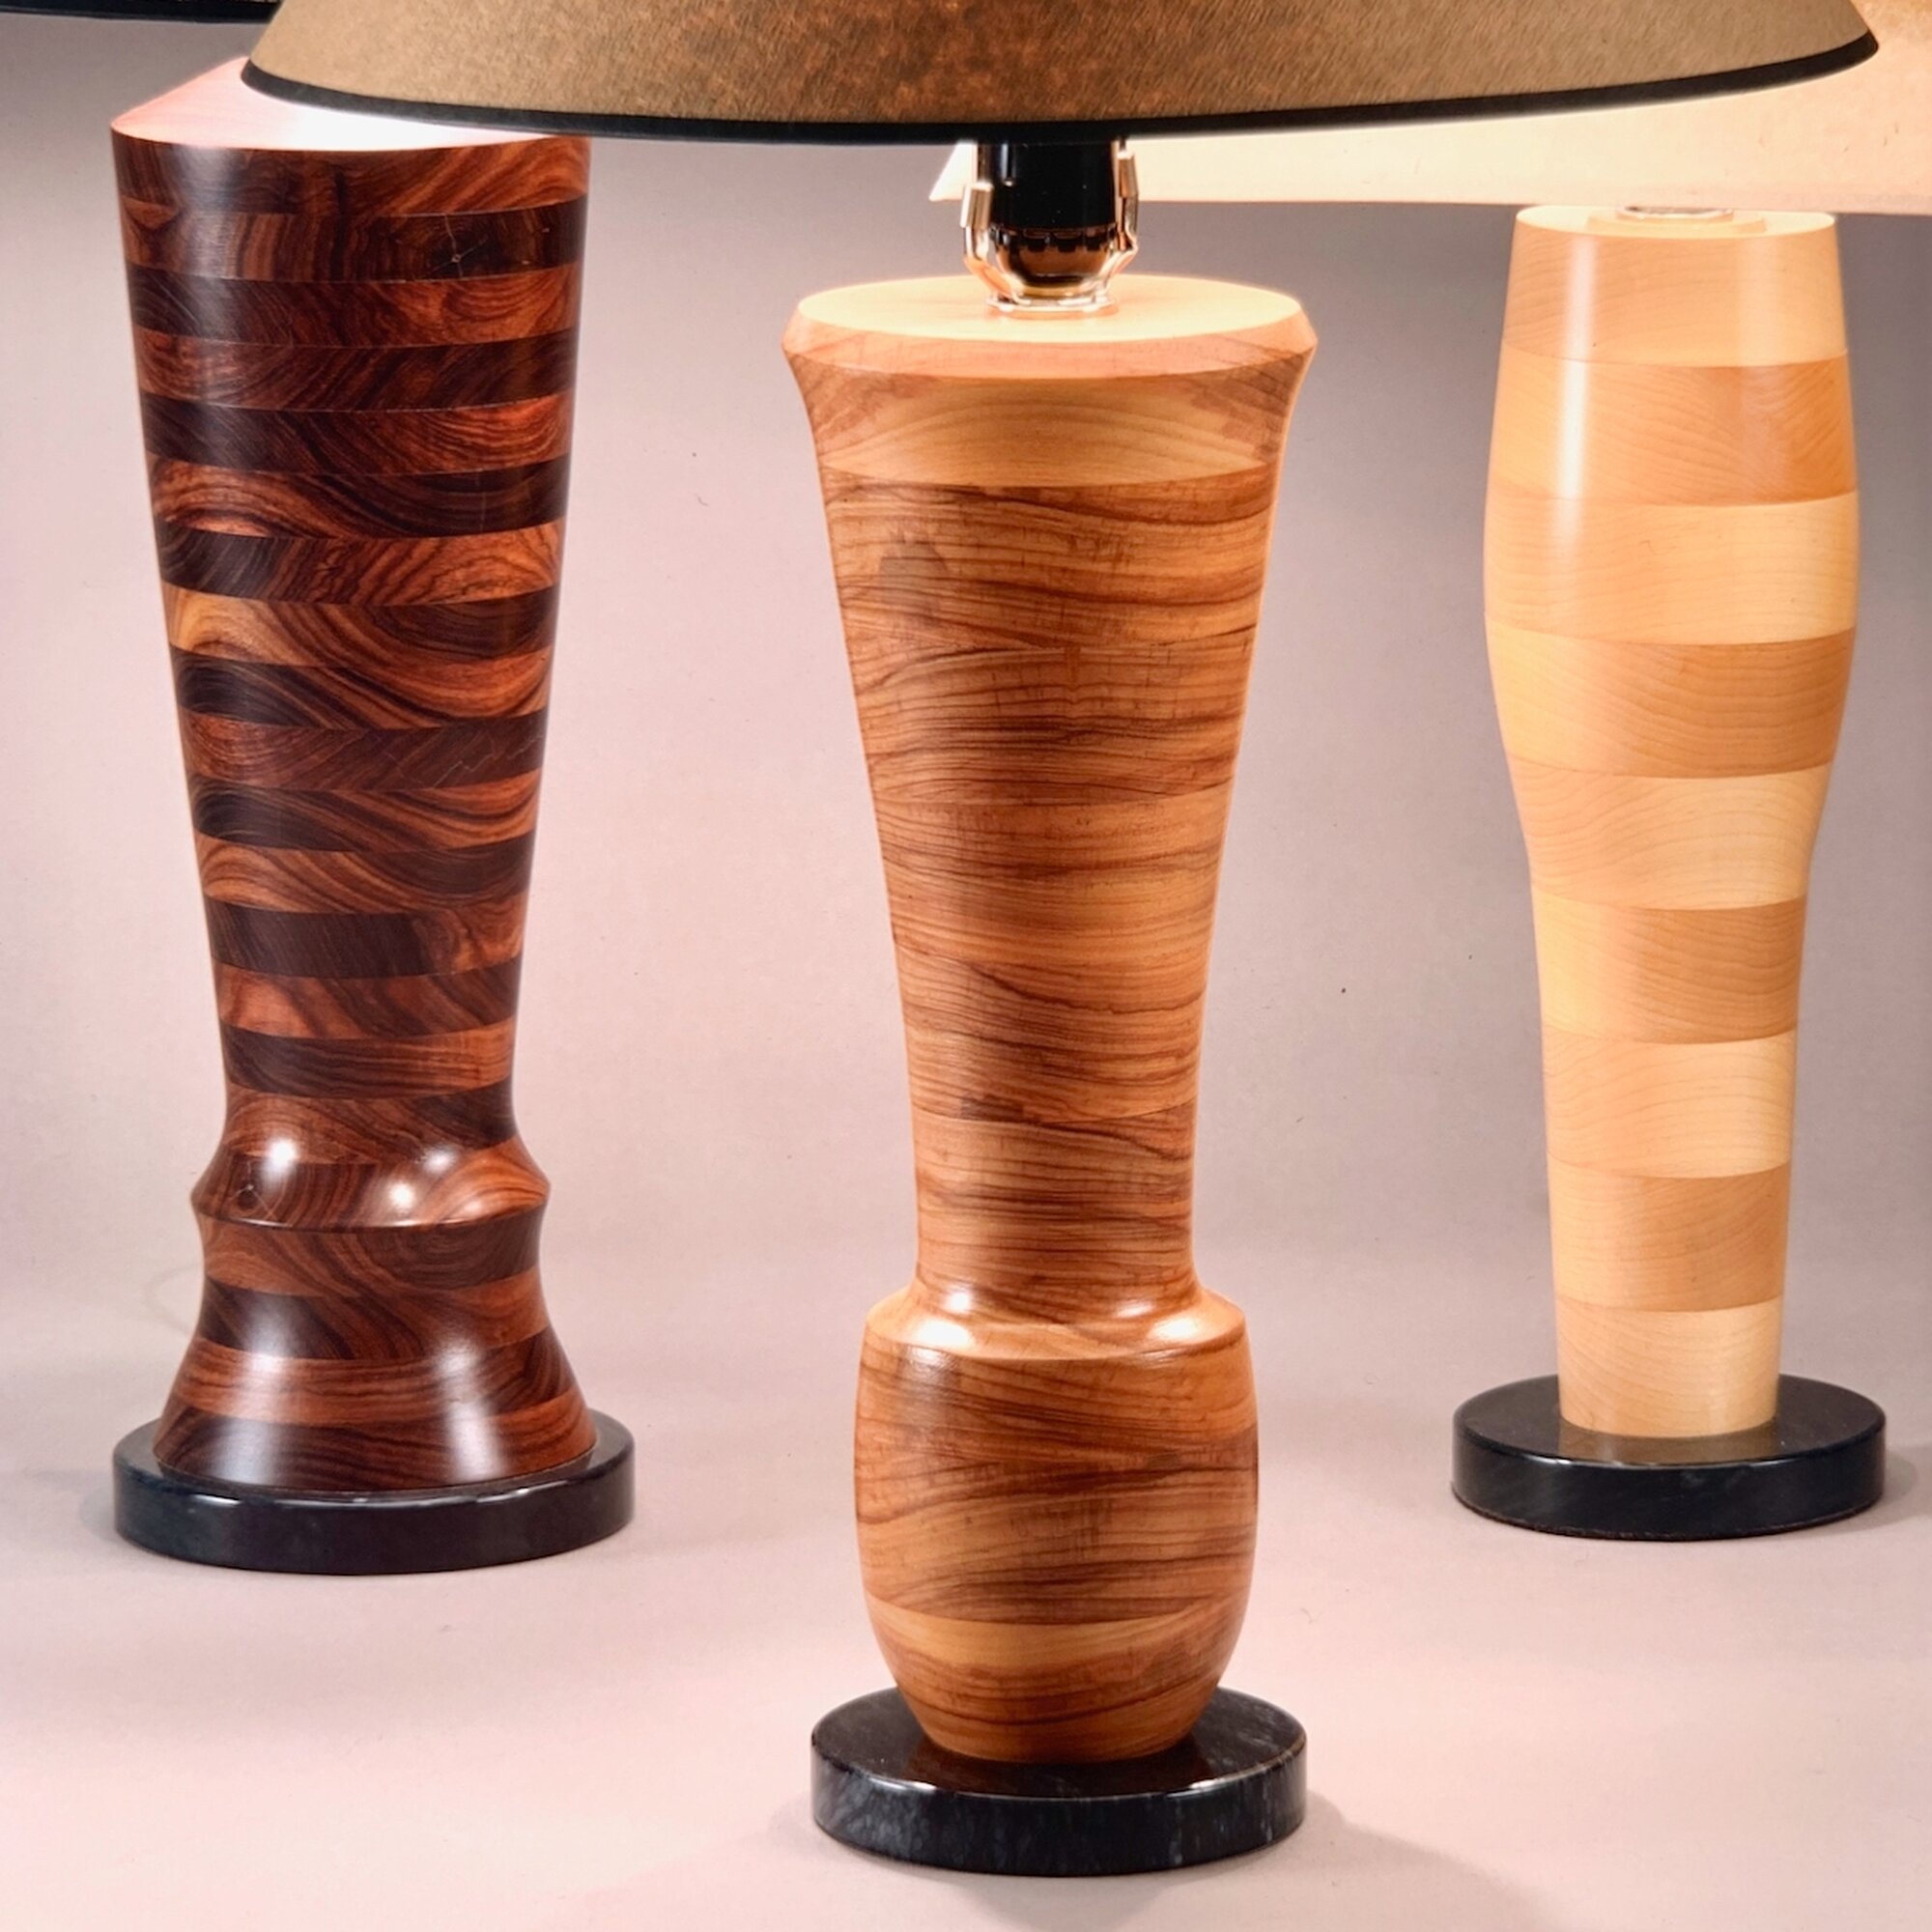 3 Turned wood lamps